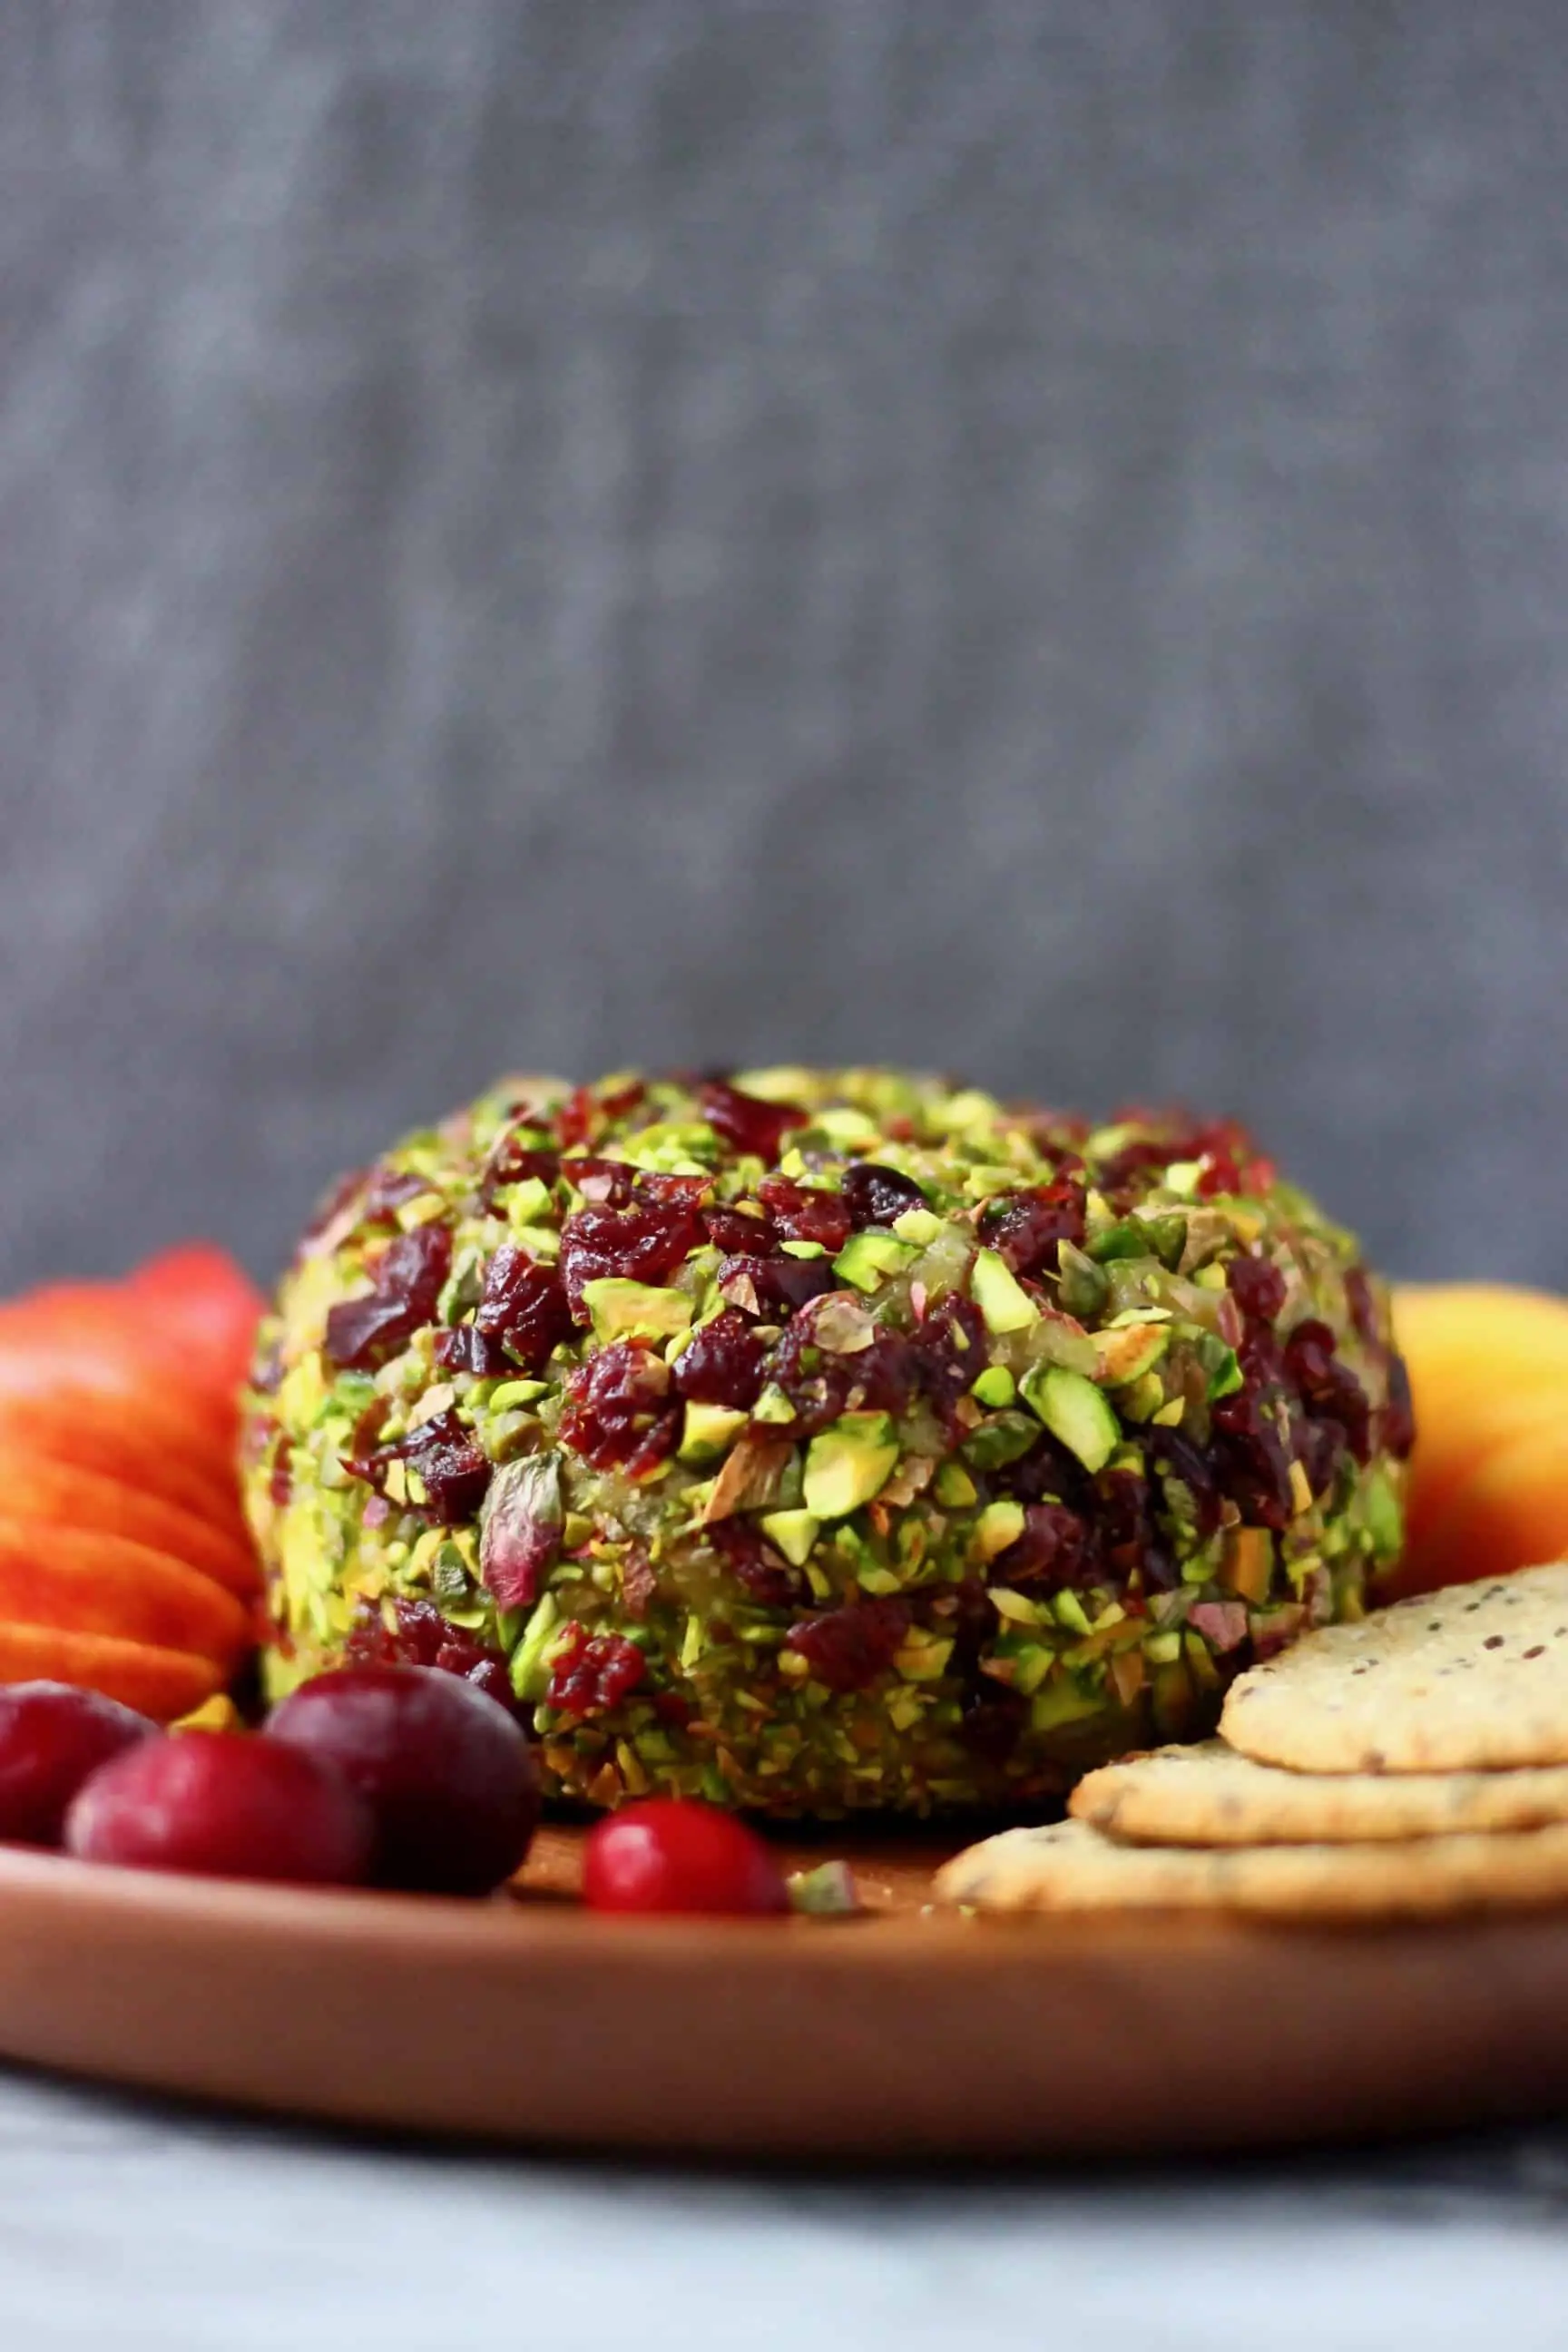 A ball of cashew cheese covered with chopped pistachios and dried cranberries on a wooden plate with sliced apples, oatcakes and fresh cranberries against a grey background